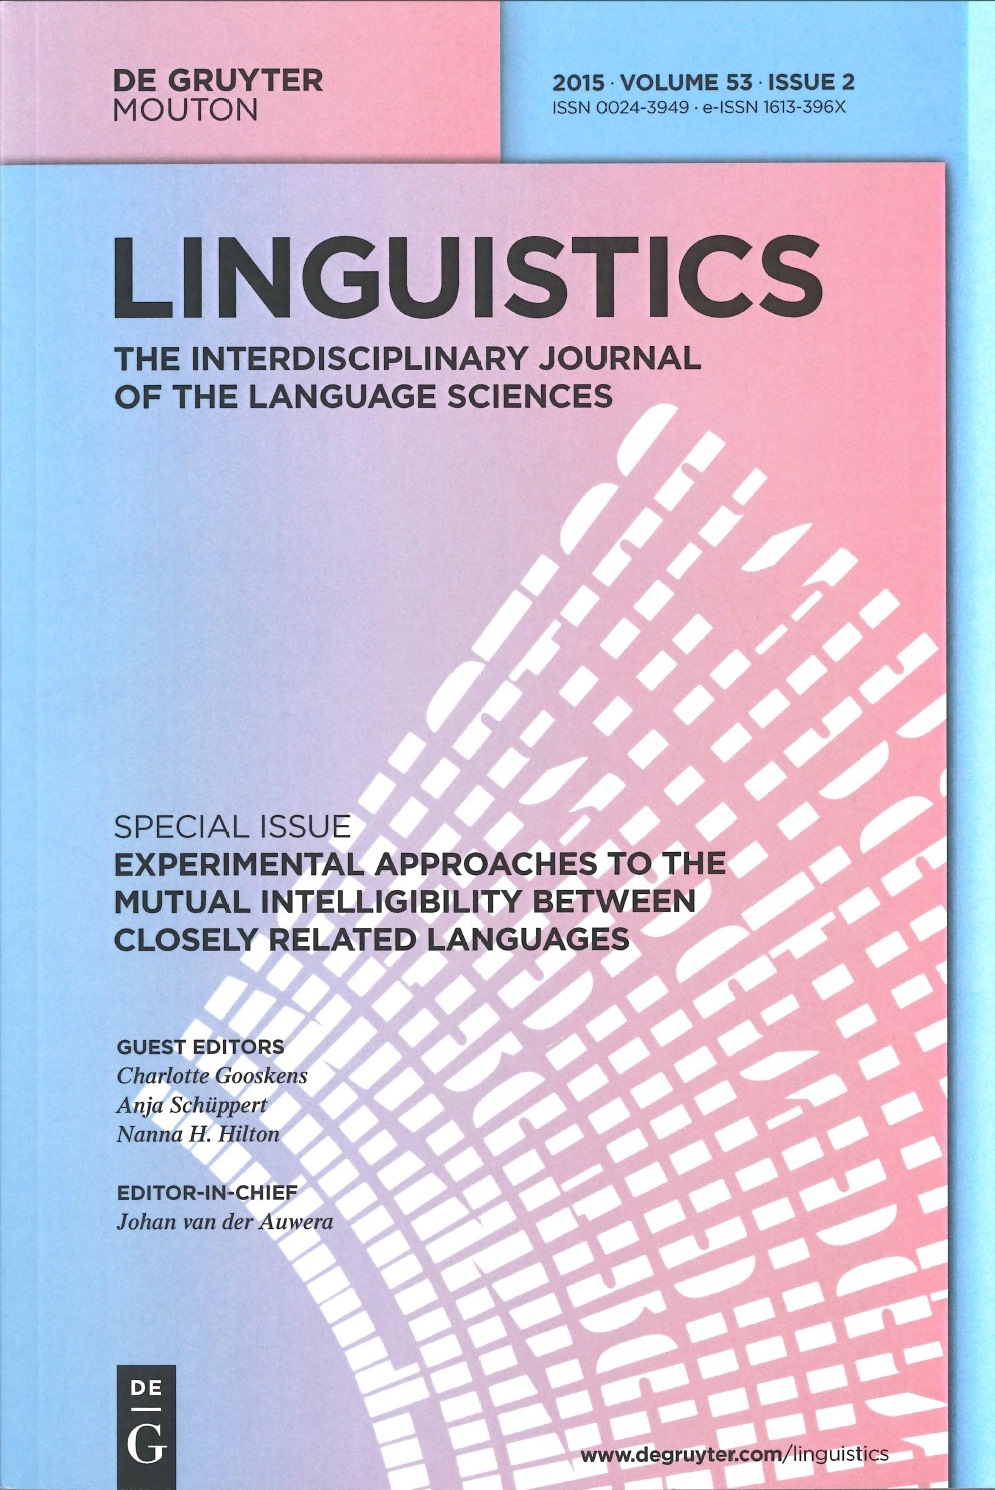 Linguistics special issue: Experimental Approaches to the Mutual Intelligibiliyy between Closely Related Languages